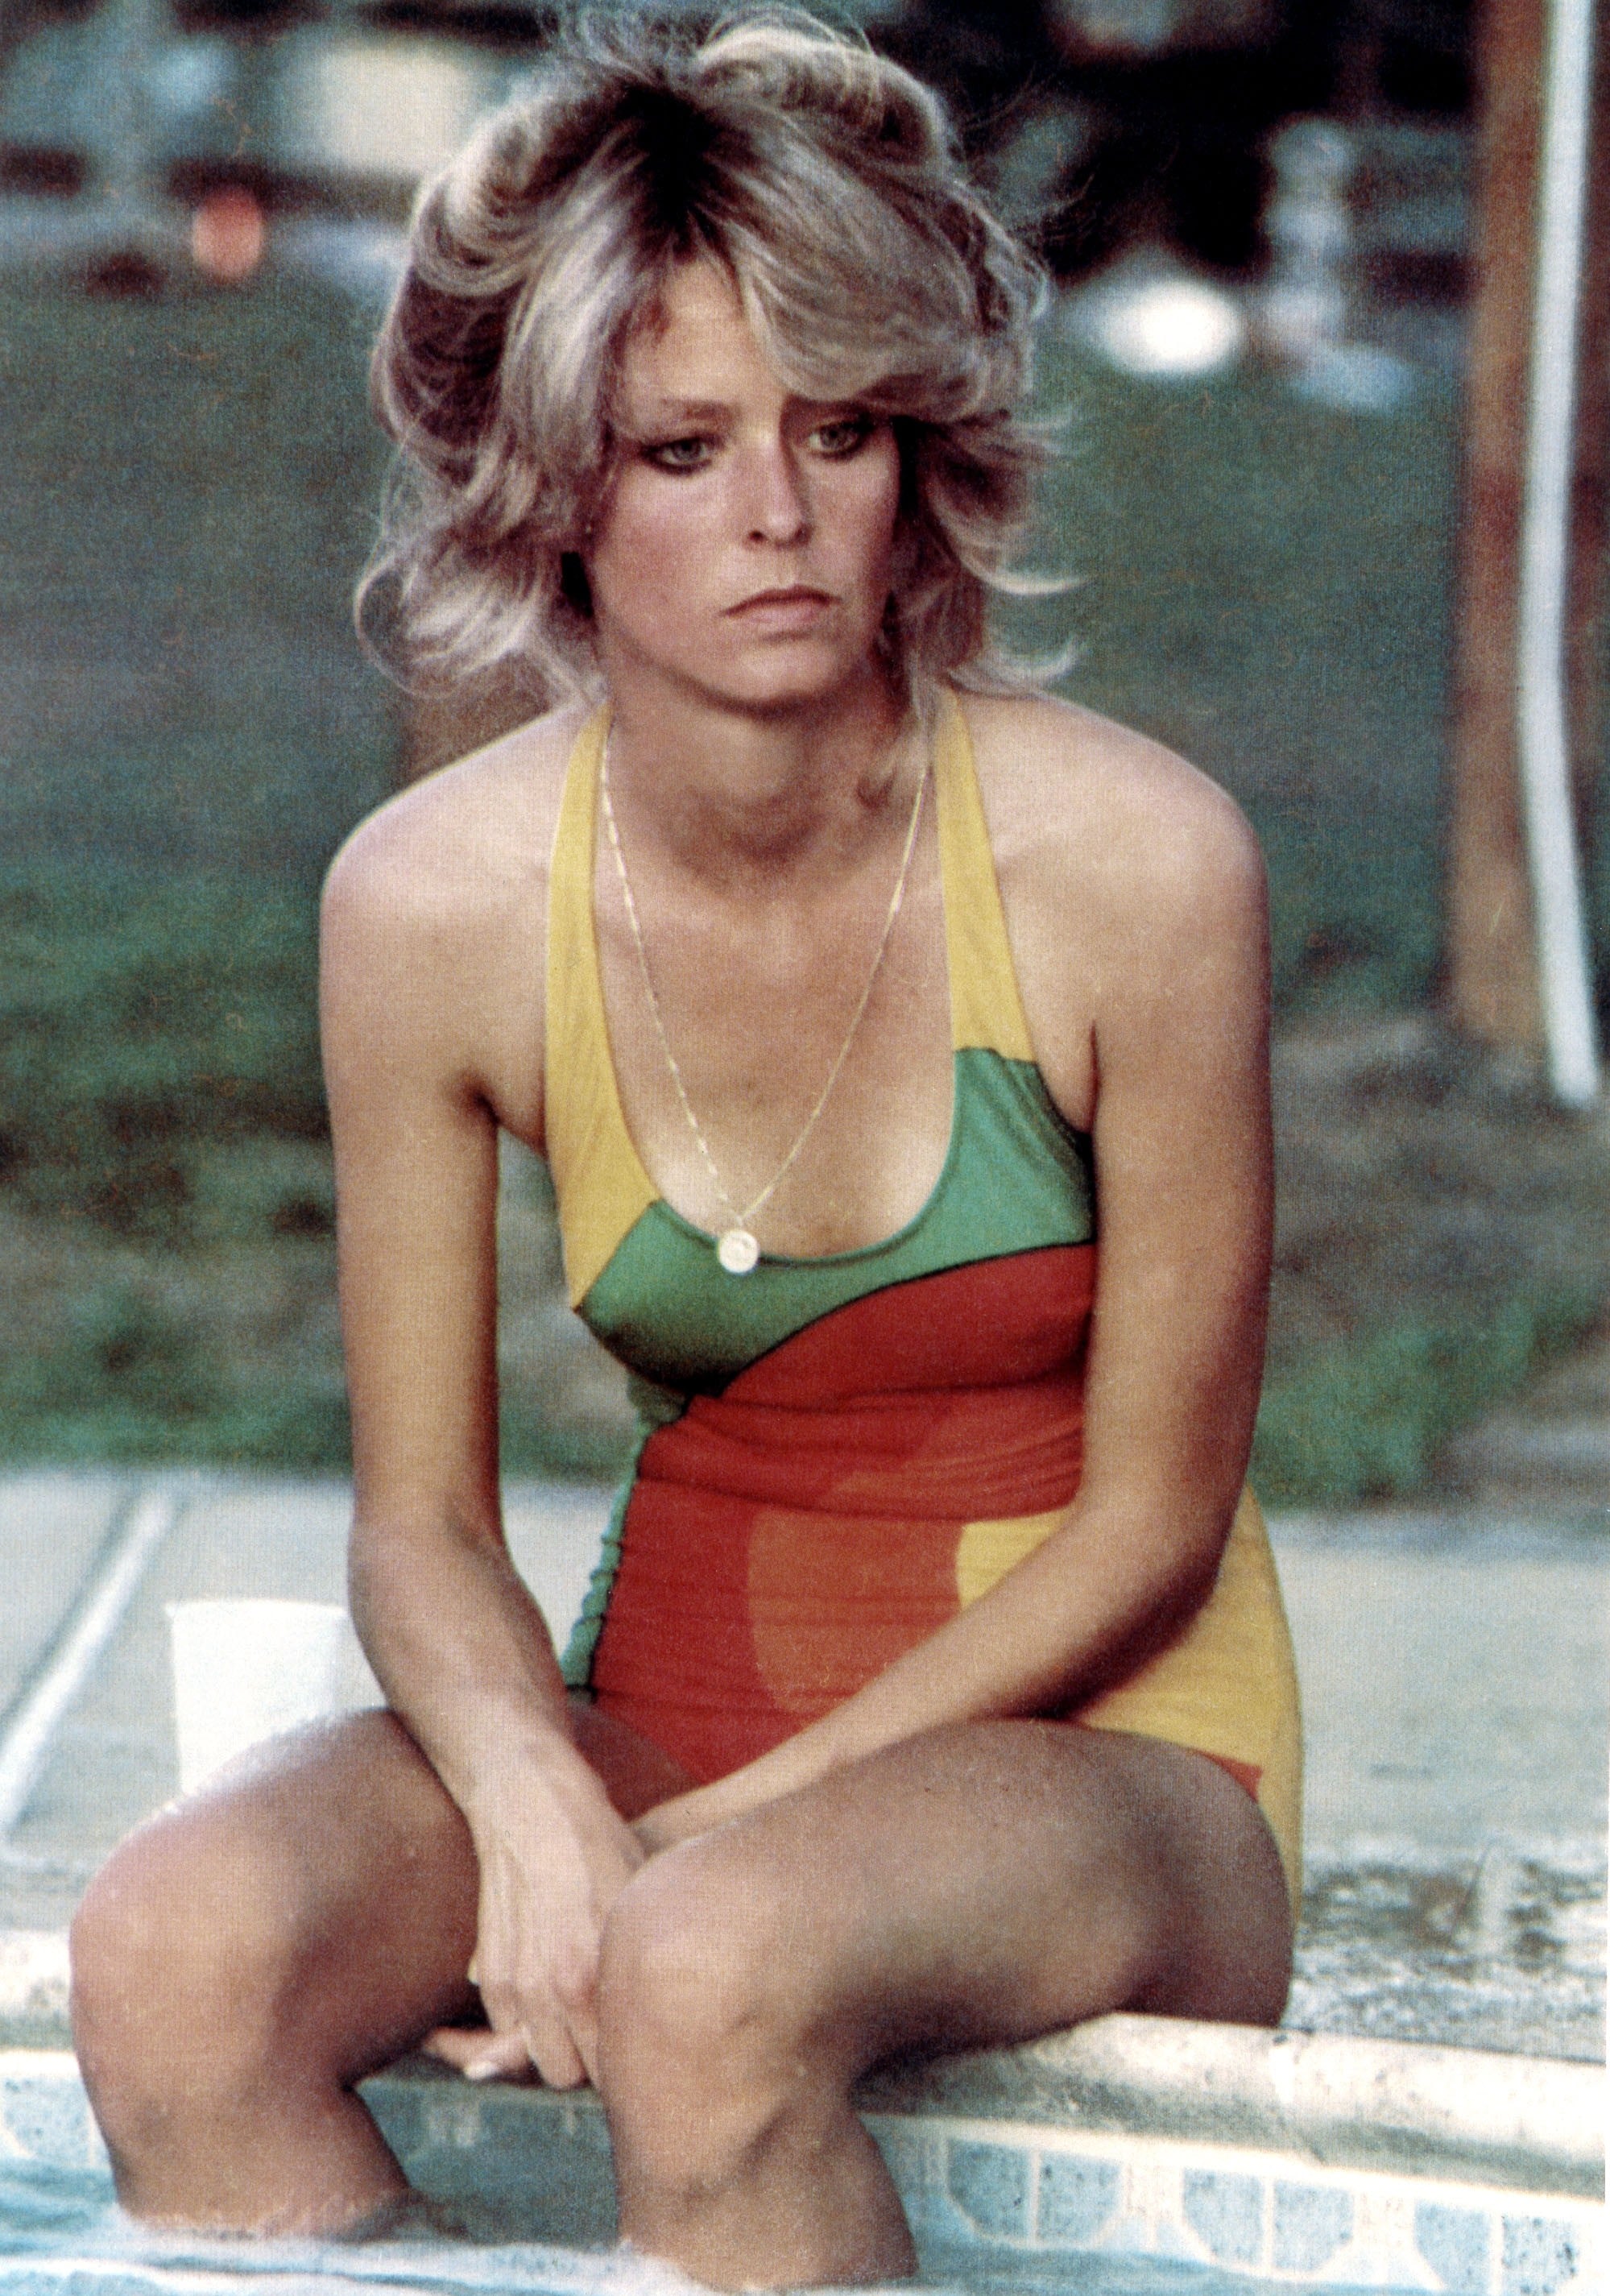 Farrah Fawcett | Even a Beach Weekend Without Soaking Up These Retro Swimsuit Photos | POPSUGAR Fashion Photo 14